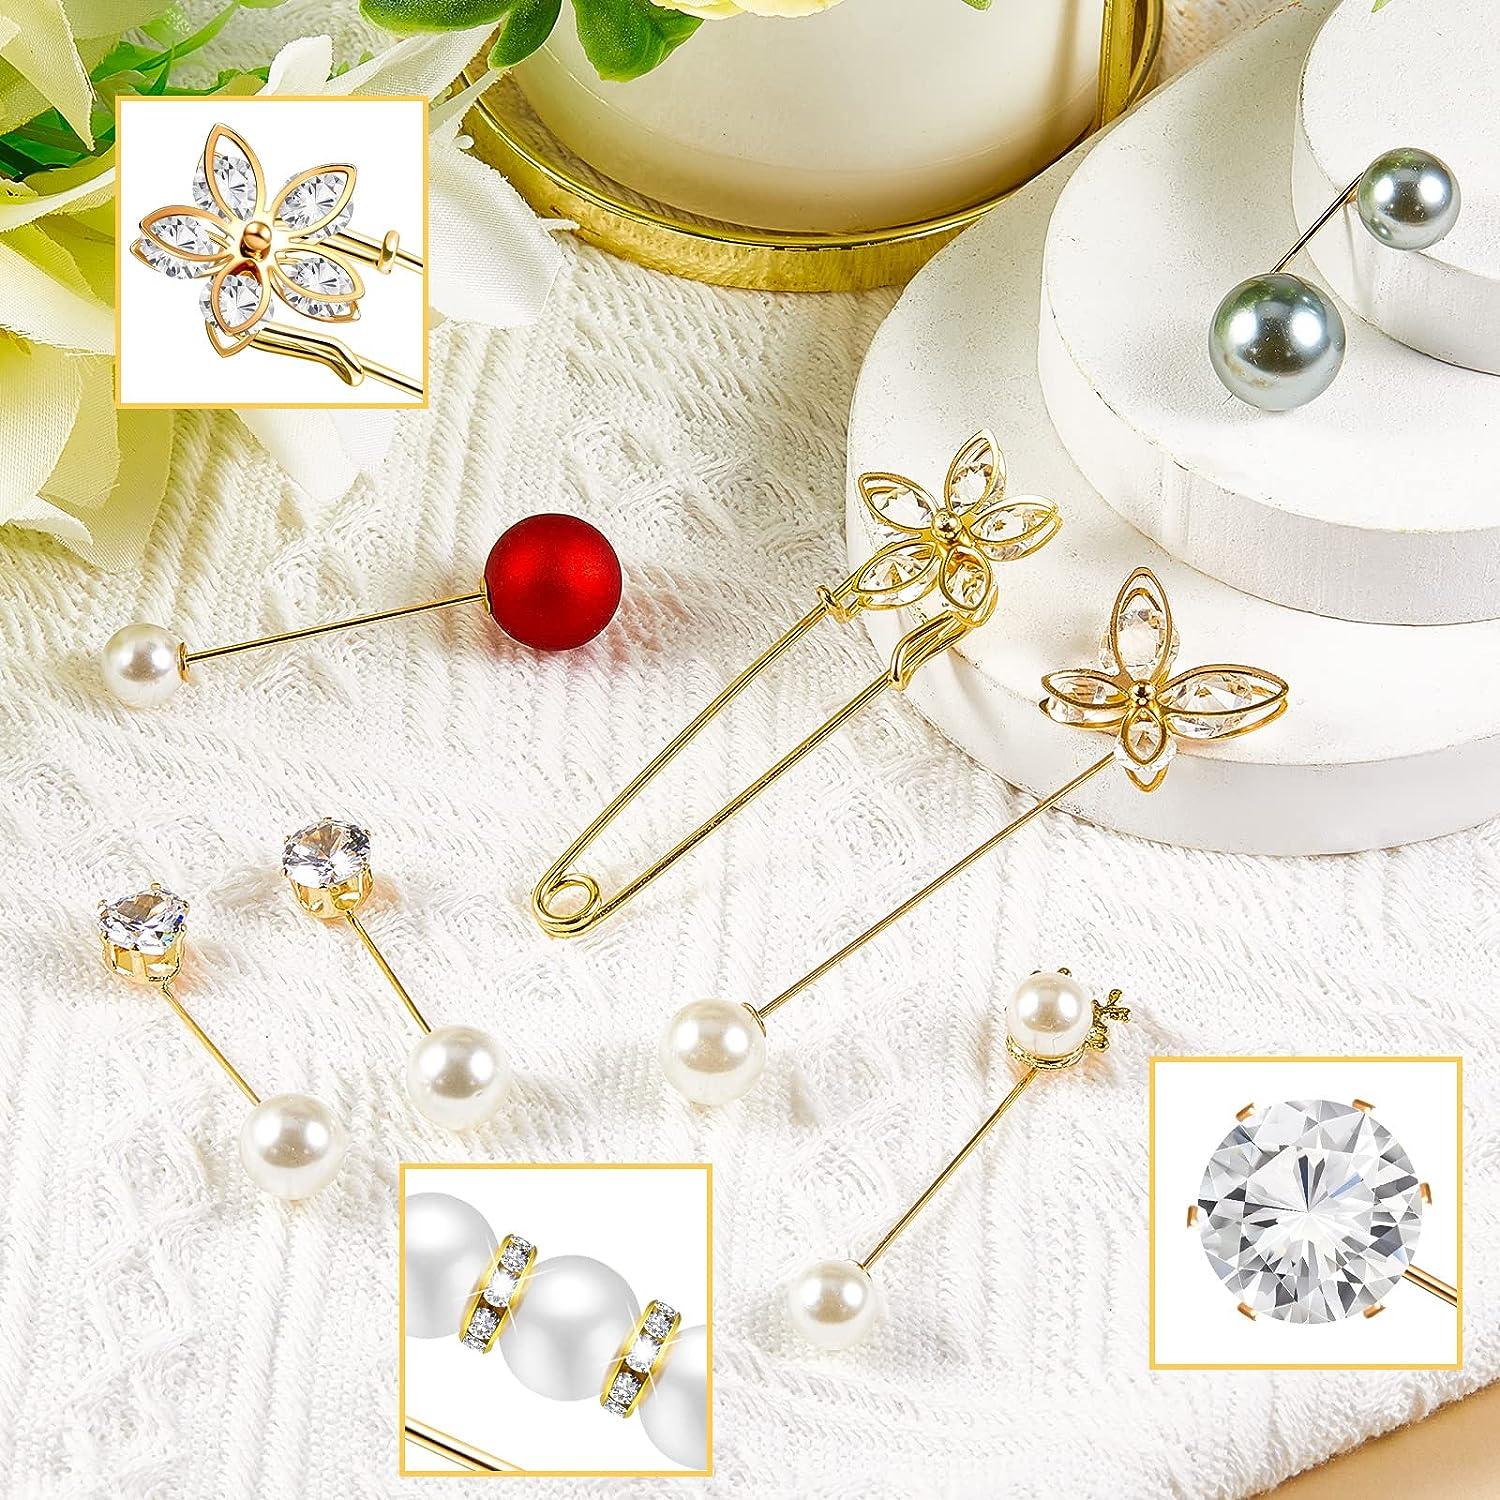 1pc Glamorous Safety Pin Design Brooch For Women For Clothes